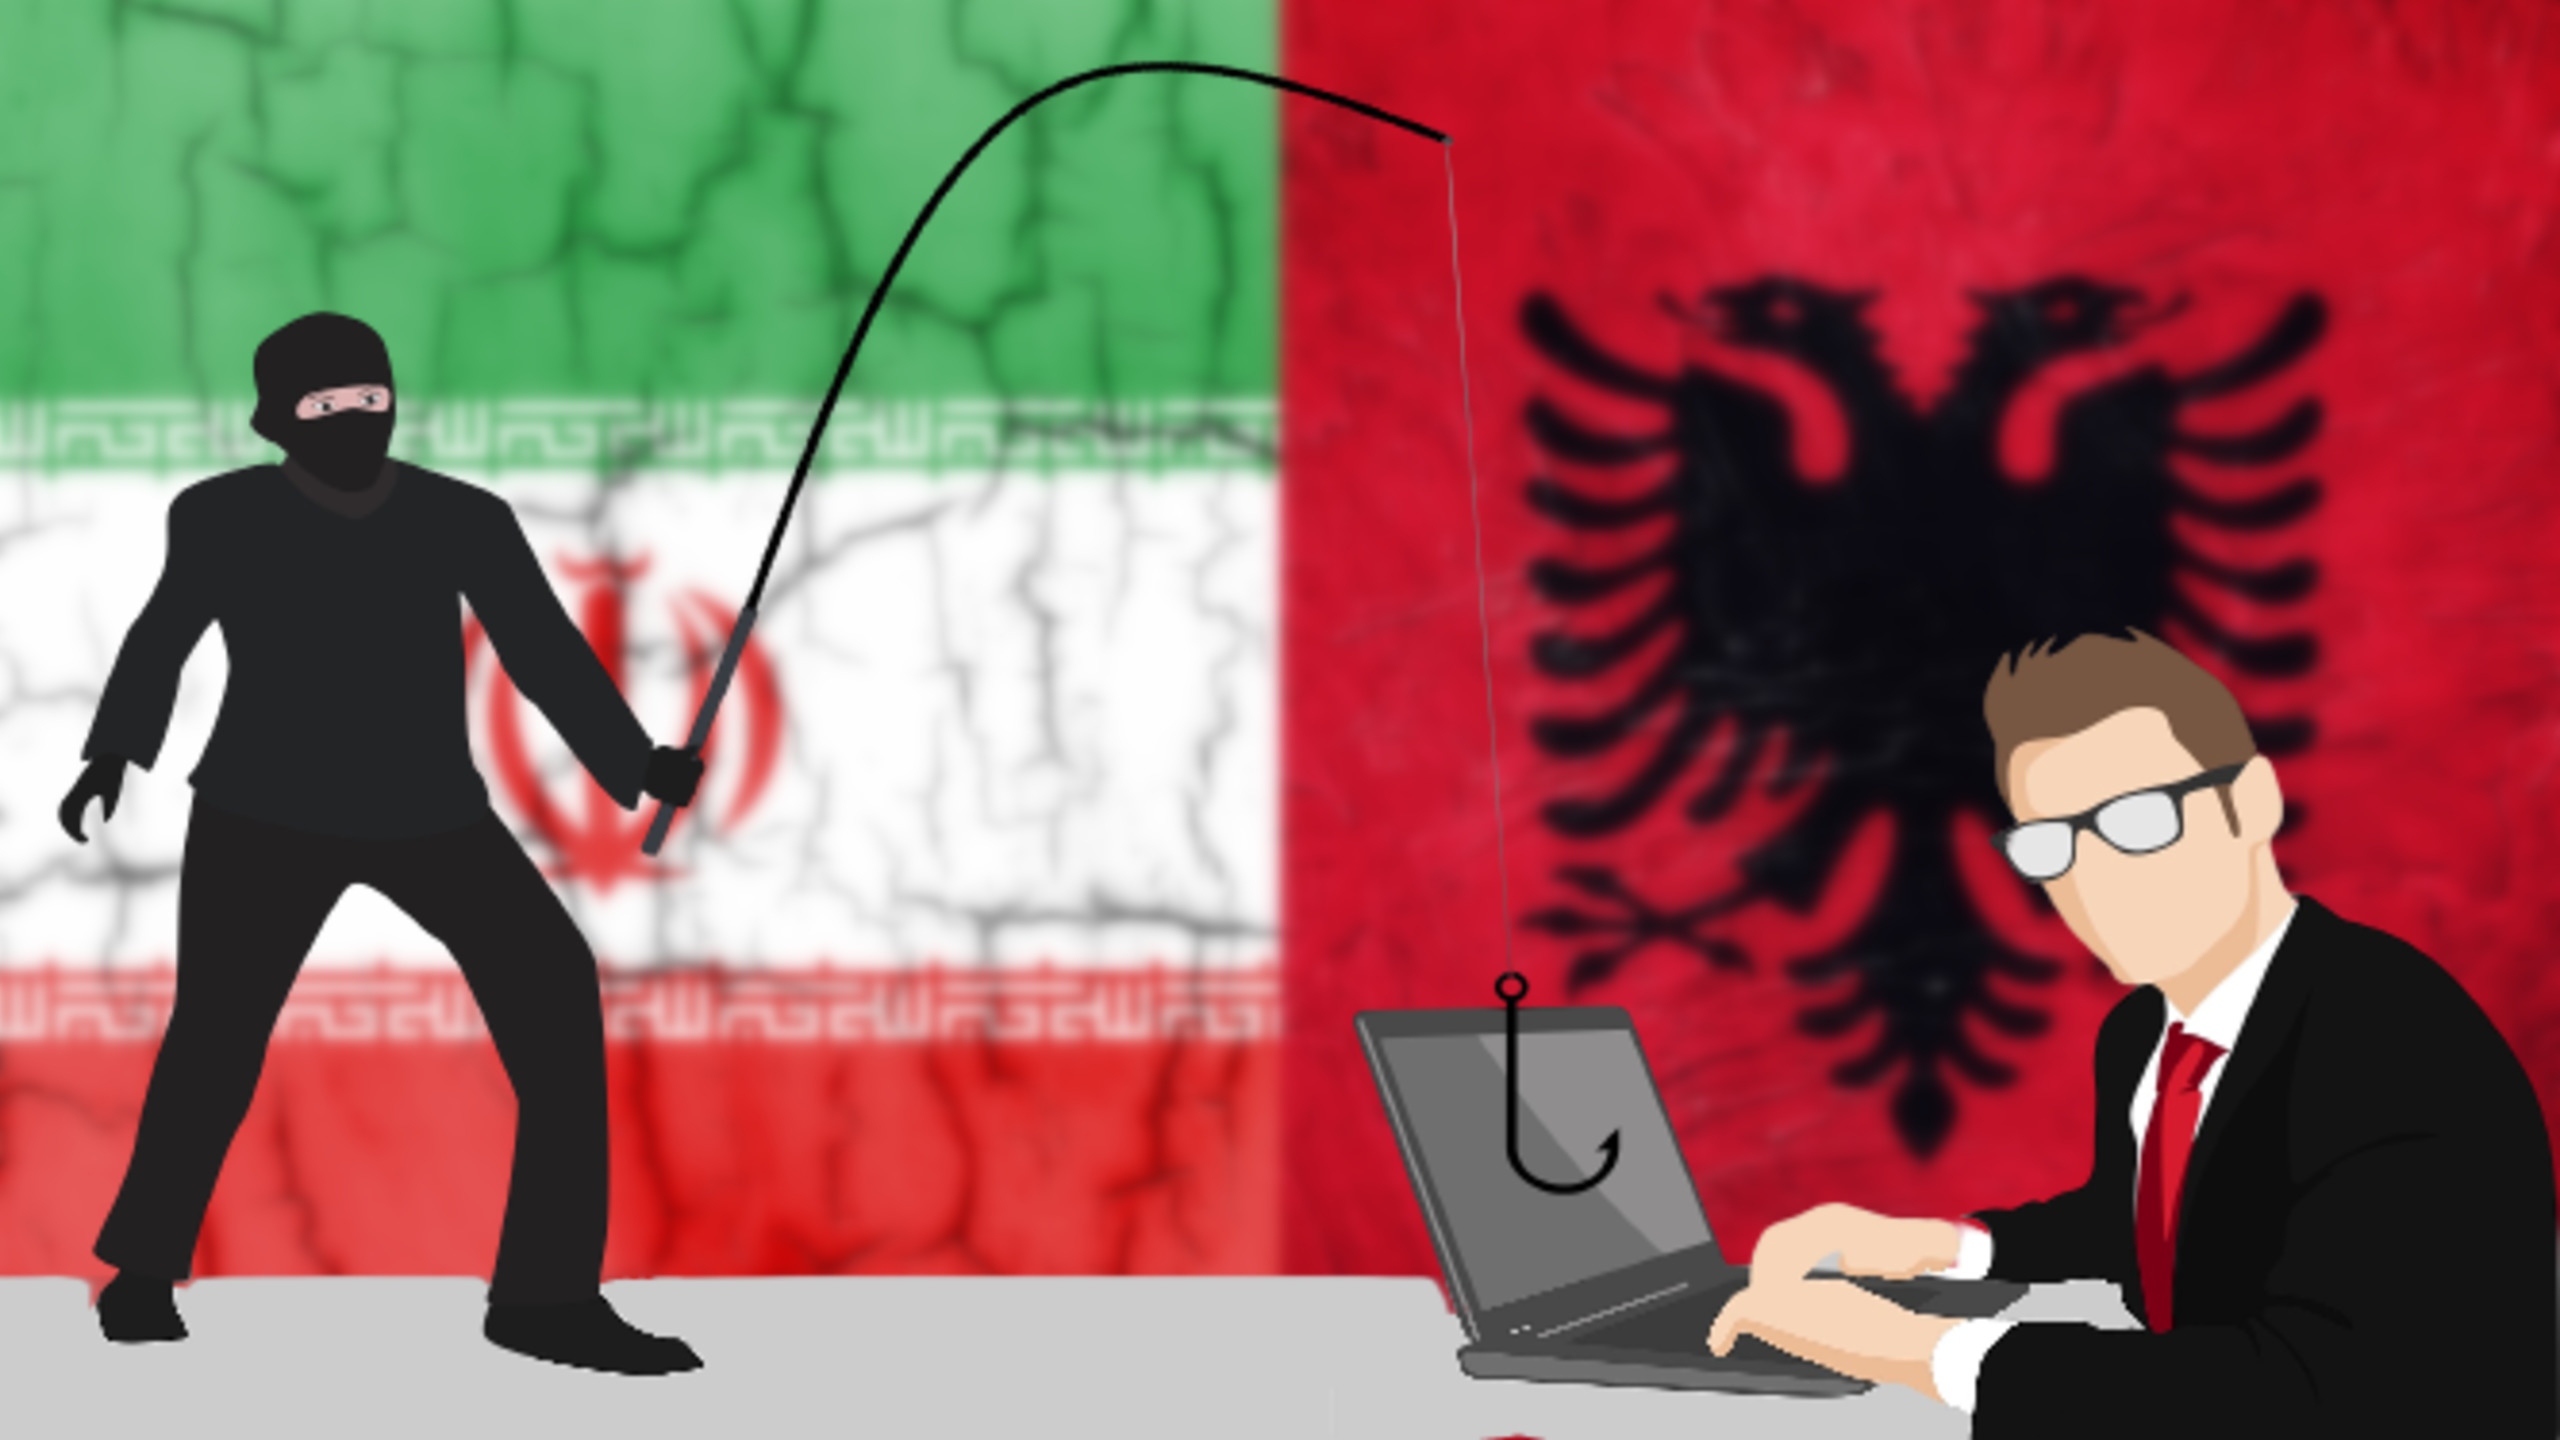 Albania Cuts Ties With Iran After Accusing Tehran of Massive Cyberattack